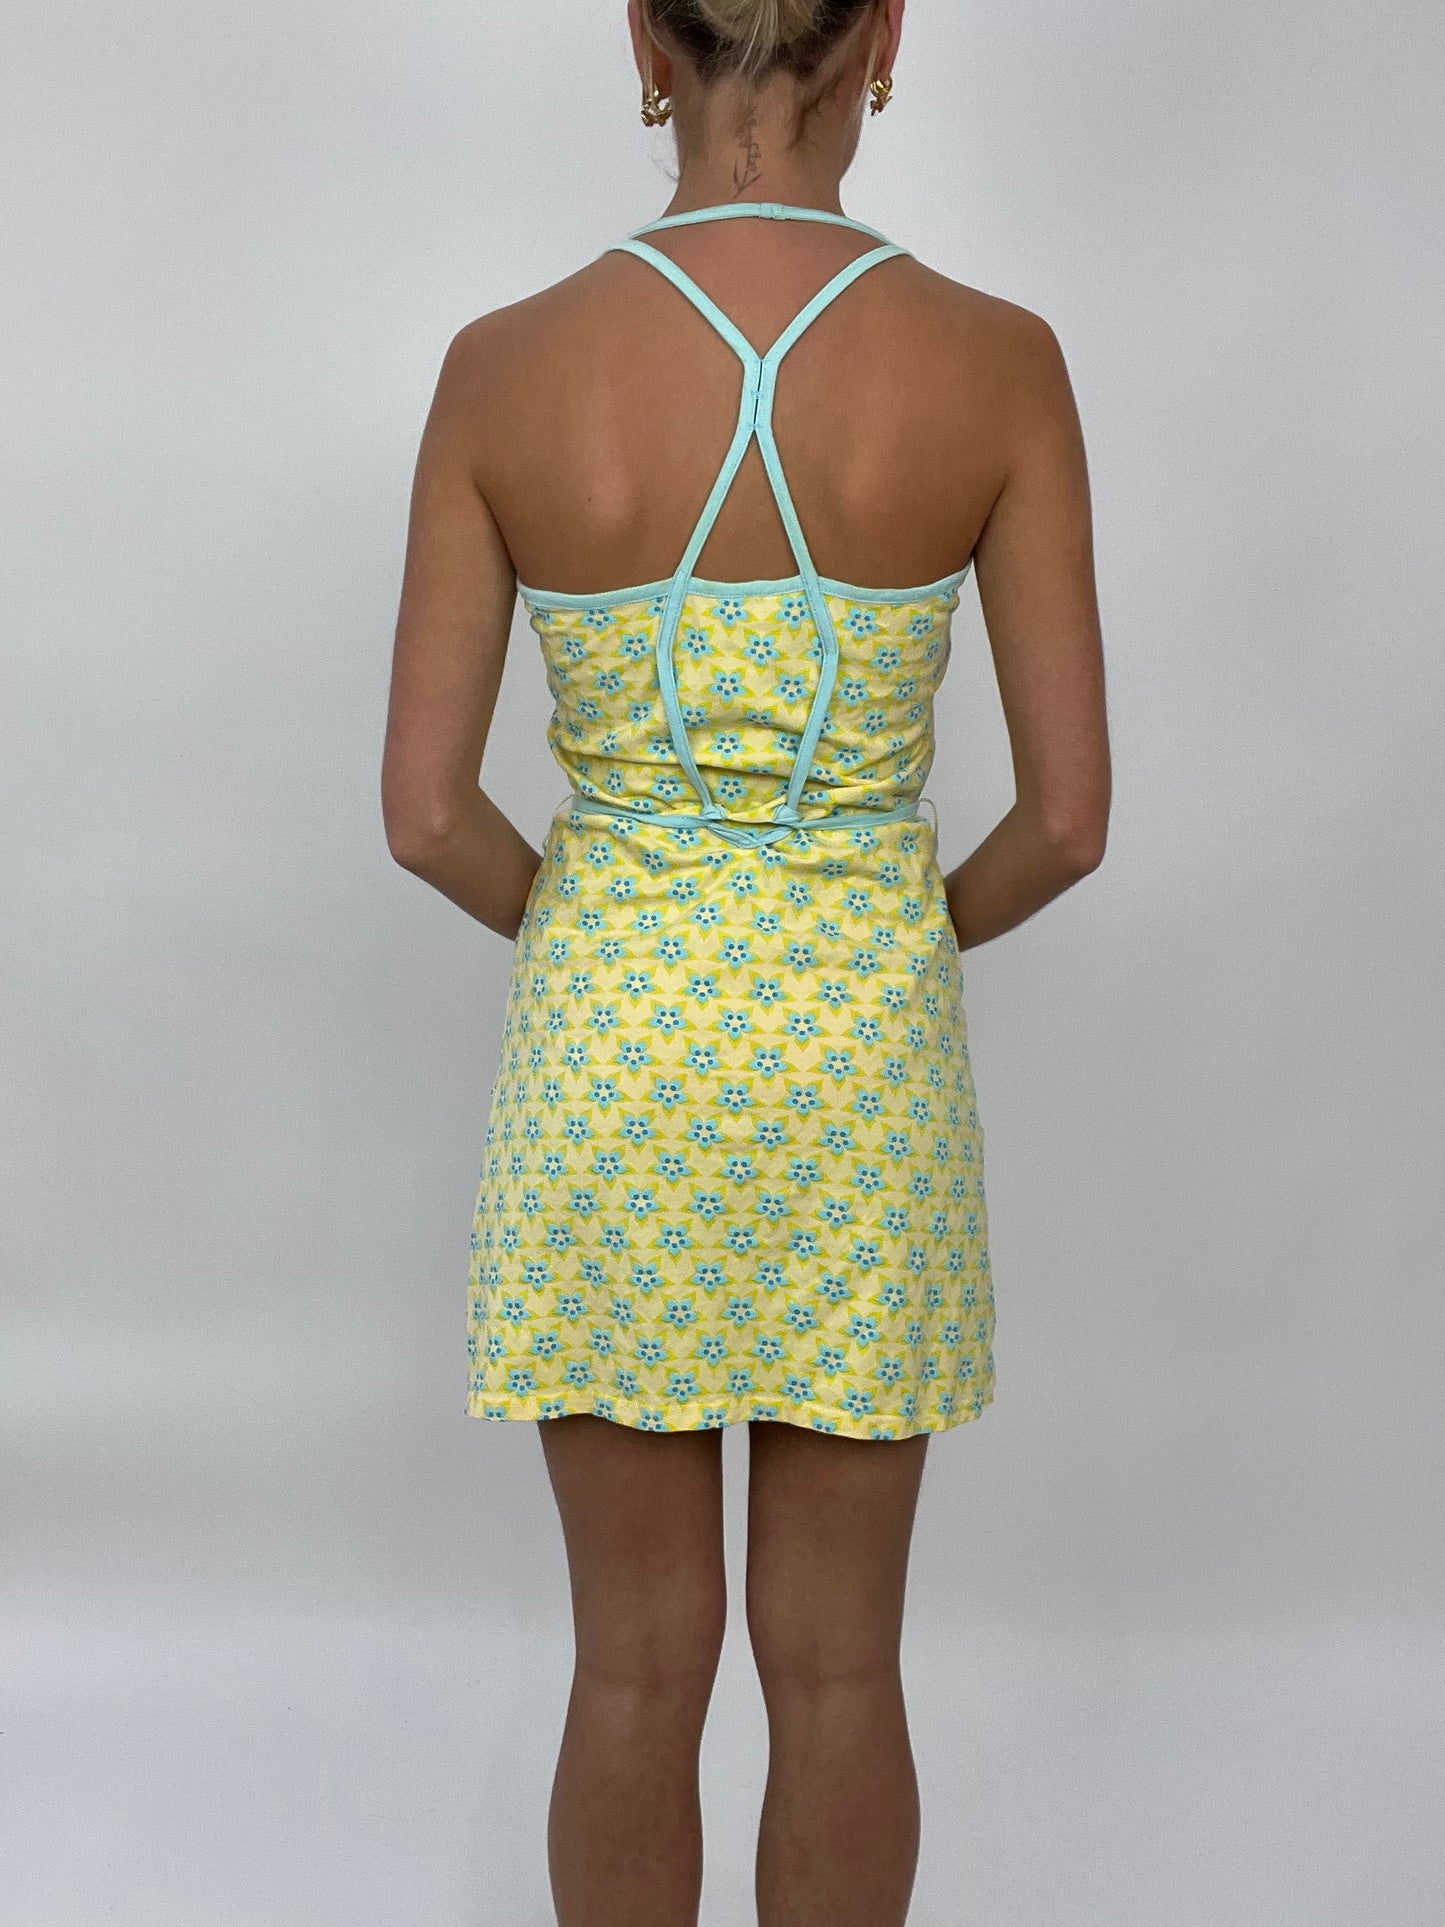 COCONUT GIRL DROP | medium yellow dress with blue floral print all over